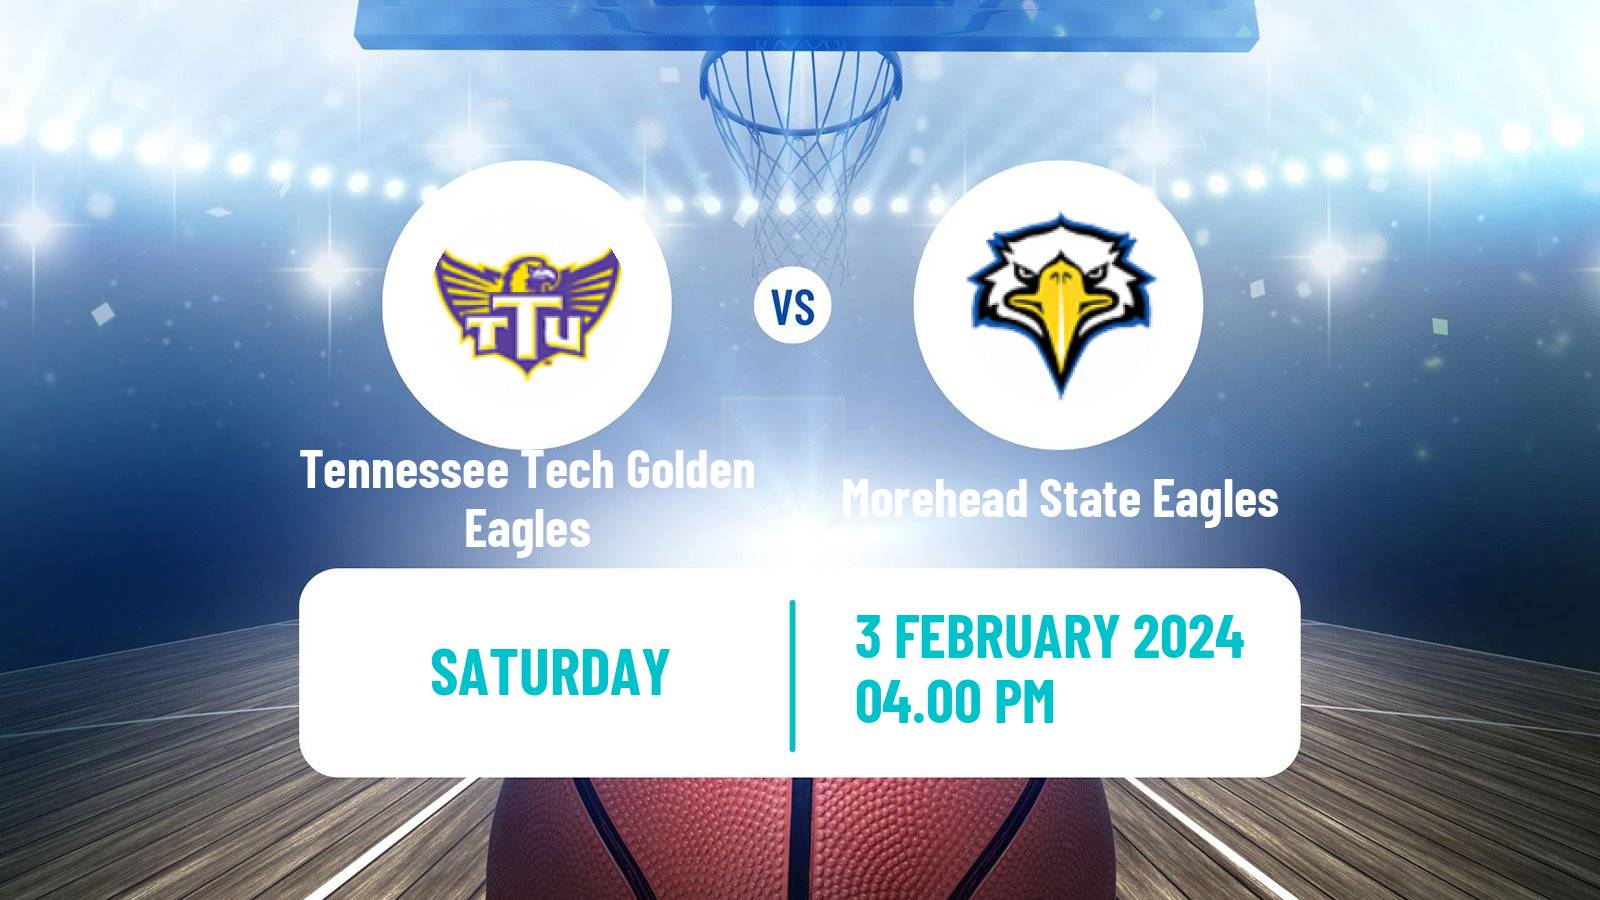 Basketball NCAA College Basketball Tennessee Tech Golden Eagles - Morehead State Eagles